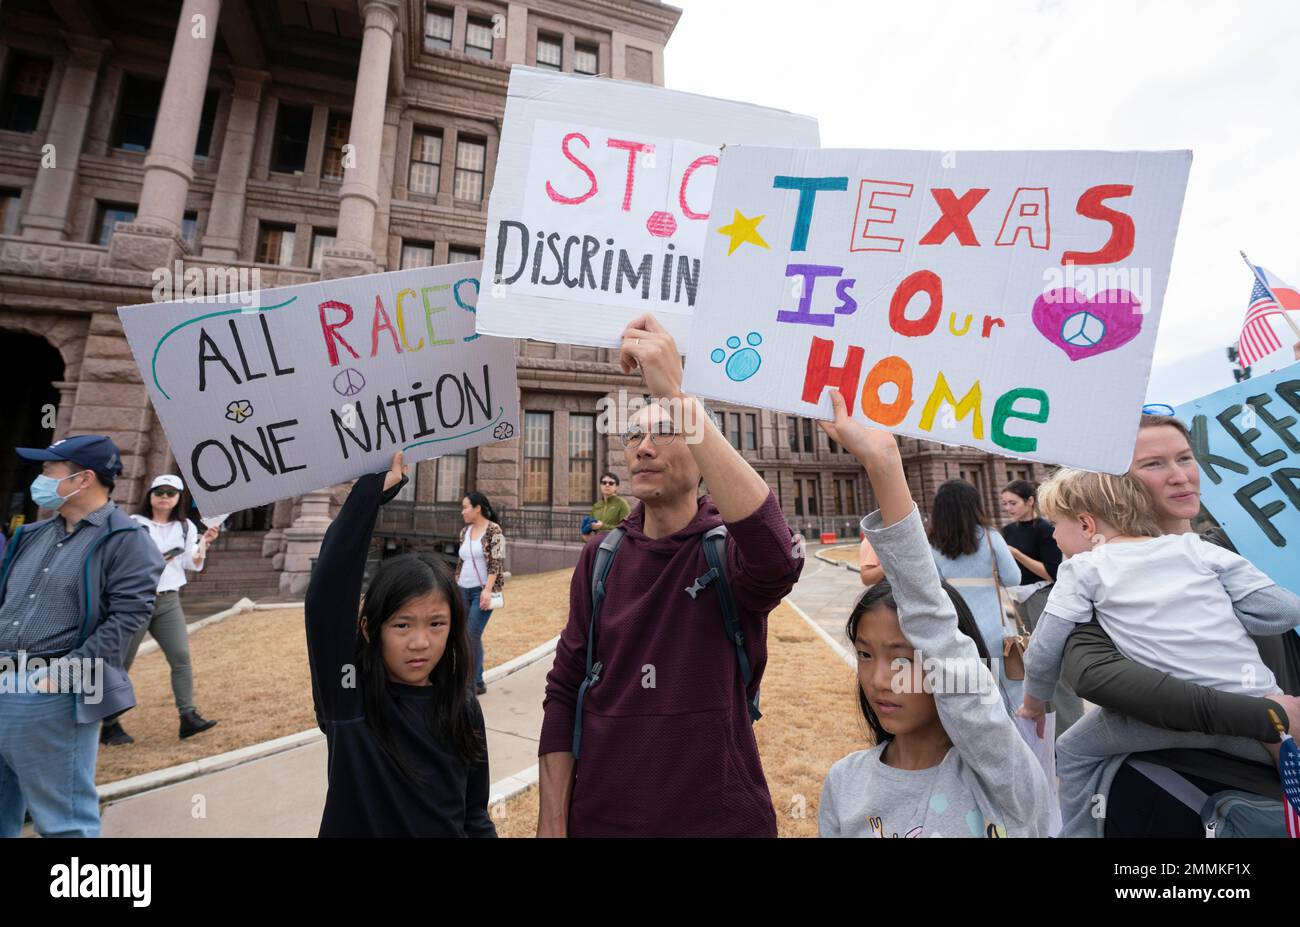 Austin Texas USA, January 29, 2023: A coalition of Texas Asian-American groups protests at the Texas Capitol against bills proposed in the Texas Senate that would restrict ownership of Texas properties from citizens of certain countries including China, Iran, and North Korea. Governor Greg Abbott and his supporters in the Texas Senate are proposing the measures, they say, for security reasons. Credit: Bob Daemmrich/Alamy Live News Stock Photo